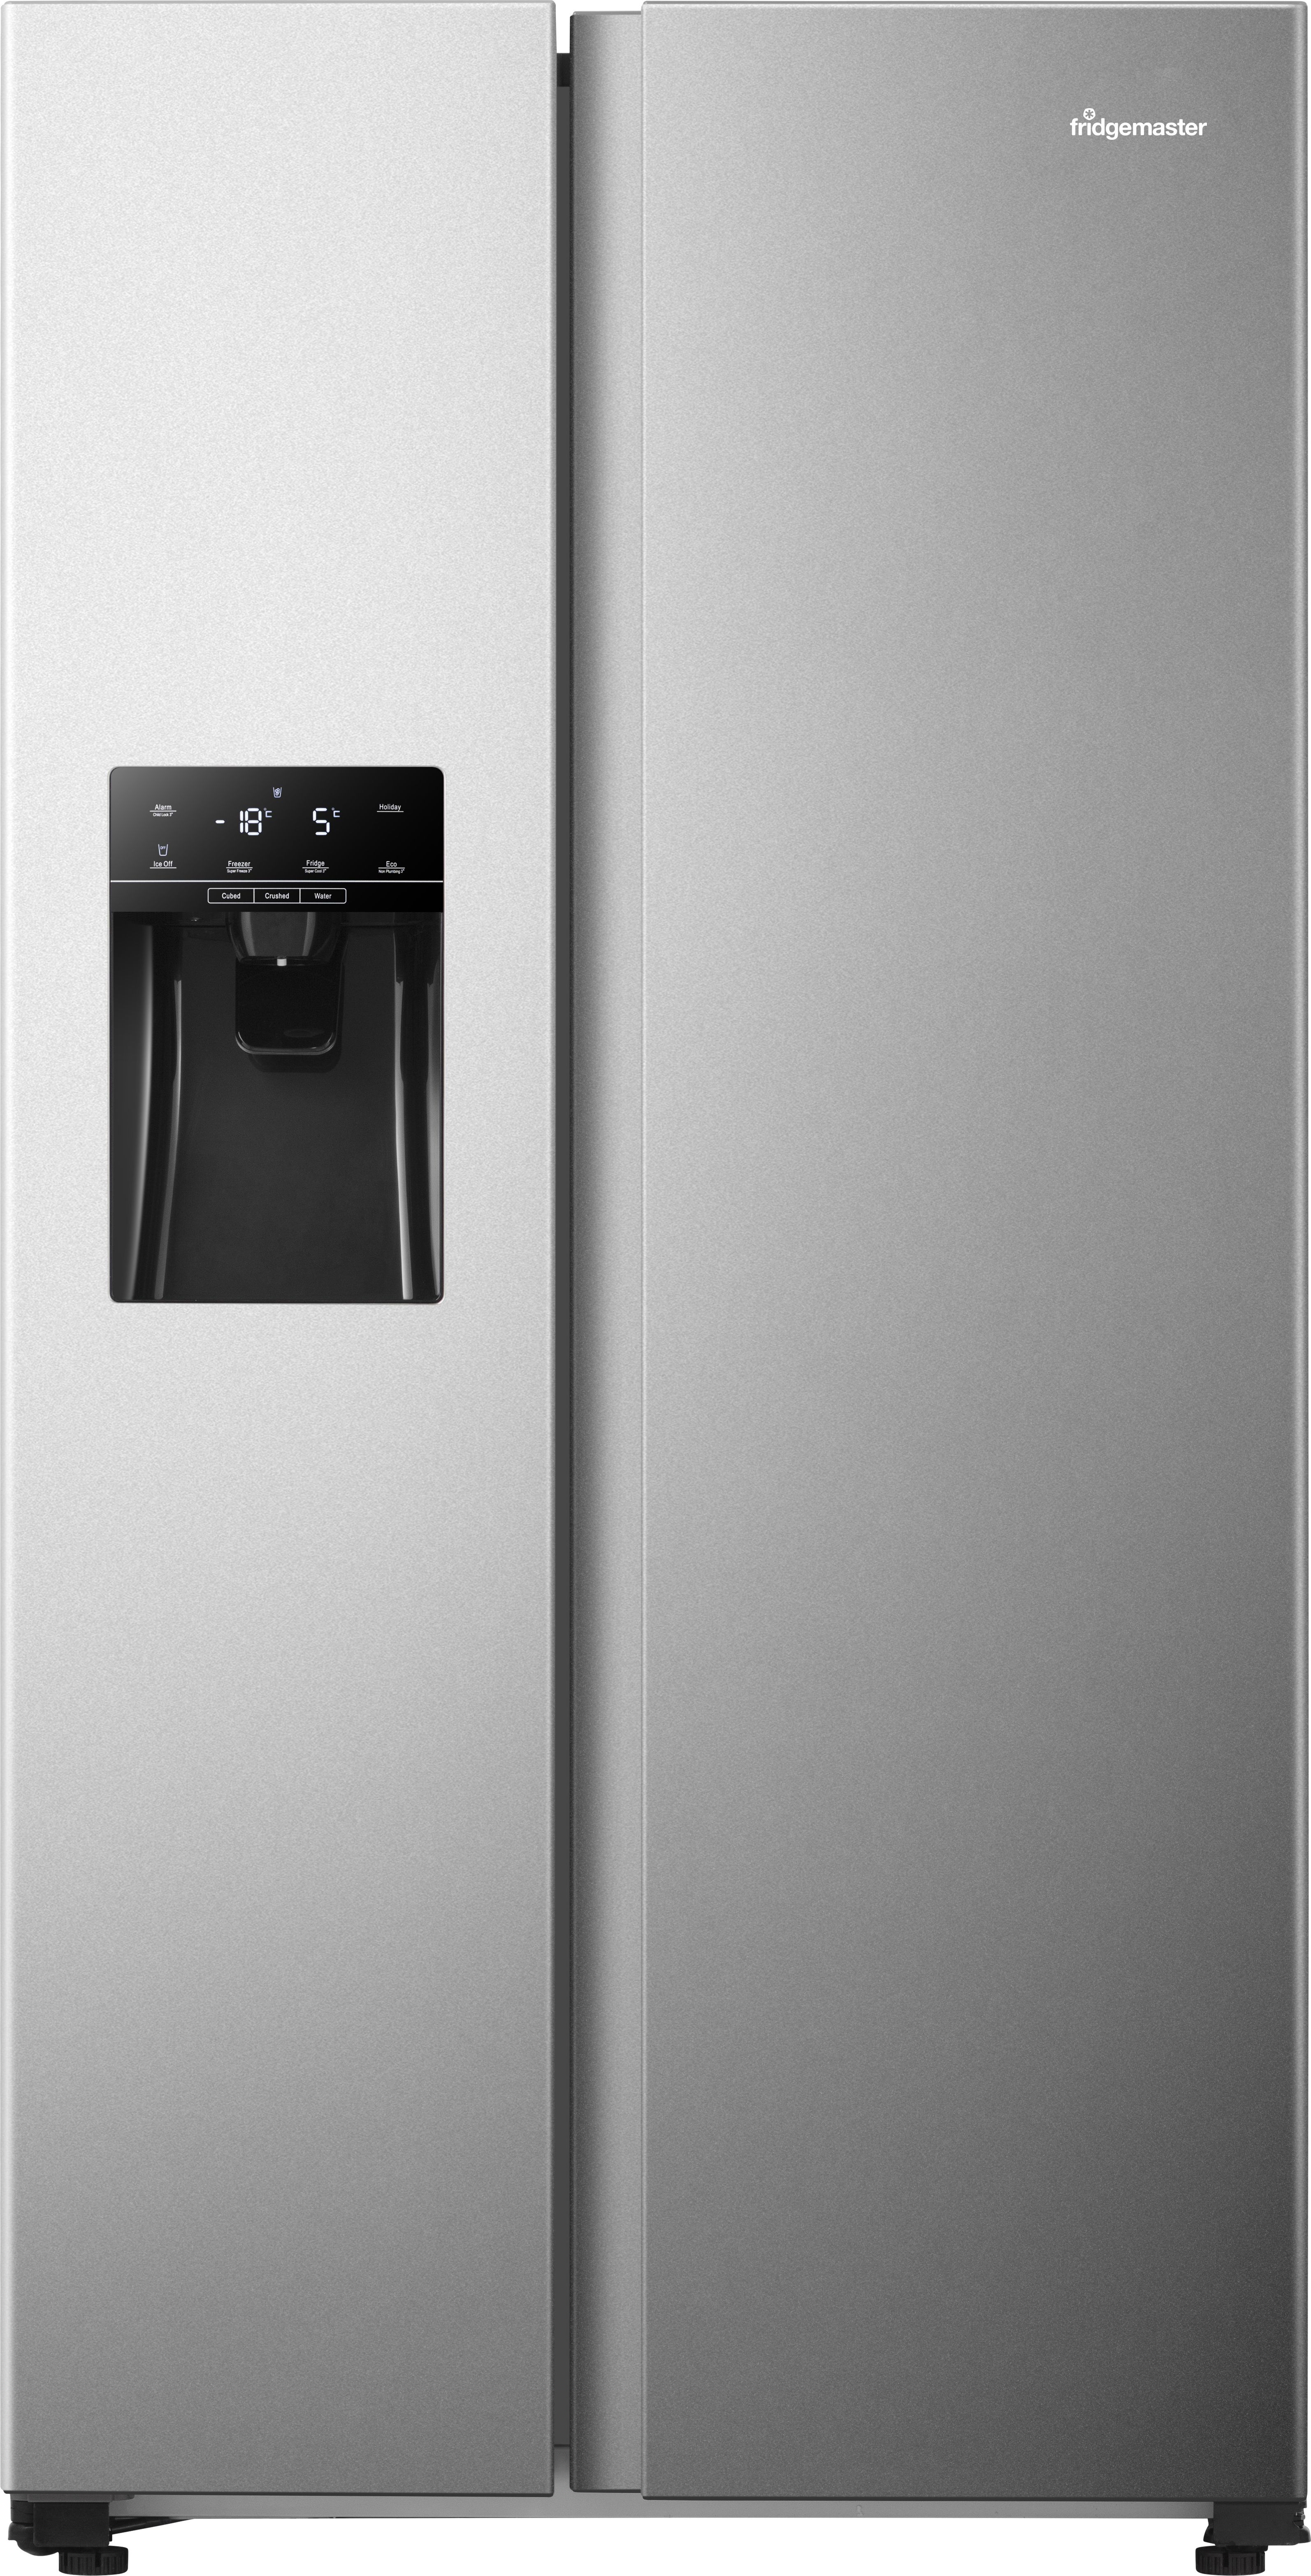 Fridgemaster MS91500IES Non-Plumbed Total No Frost American Fridge Freezer - Silver - E Rated, Silver